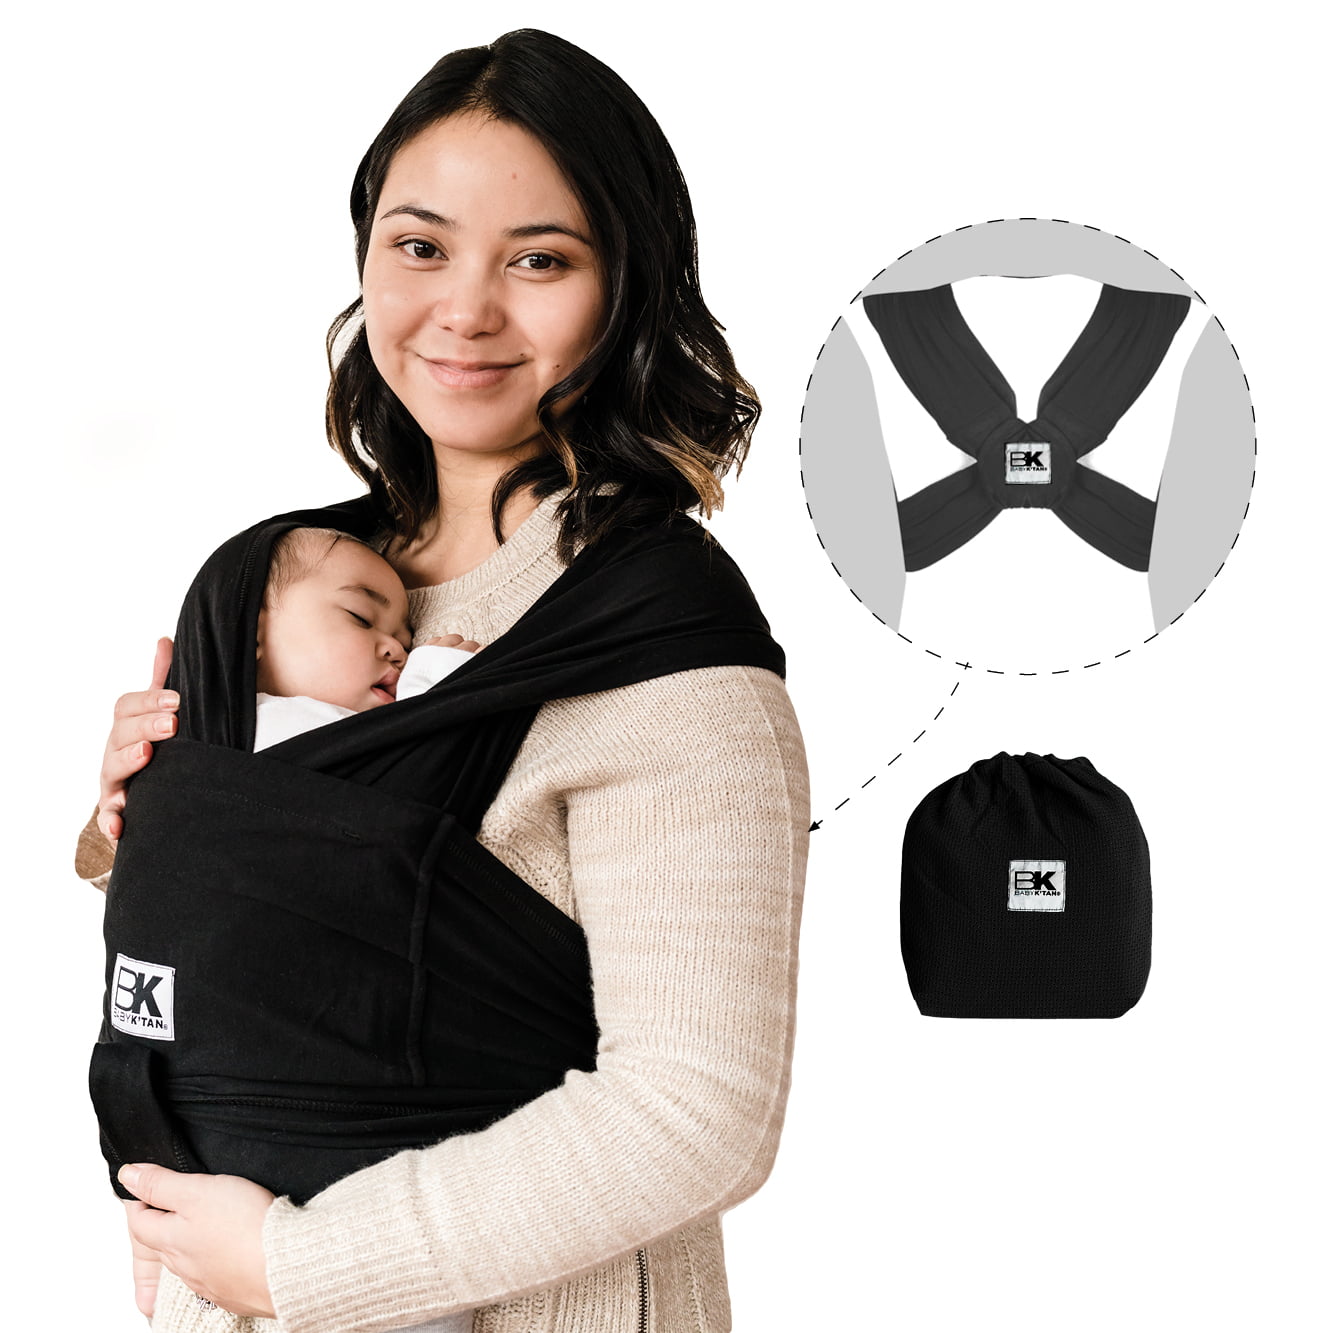 Baby Wrap Carrier Slings Adjustable Baby Carrier Newborn to Toddler Original Stretchy Infant Sling Perfect for Newborn Babies and Children up to 35 lbs（Grey） 